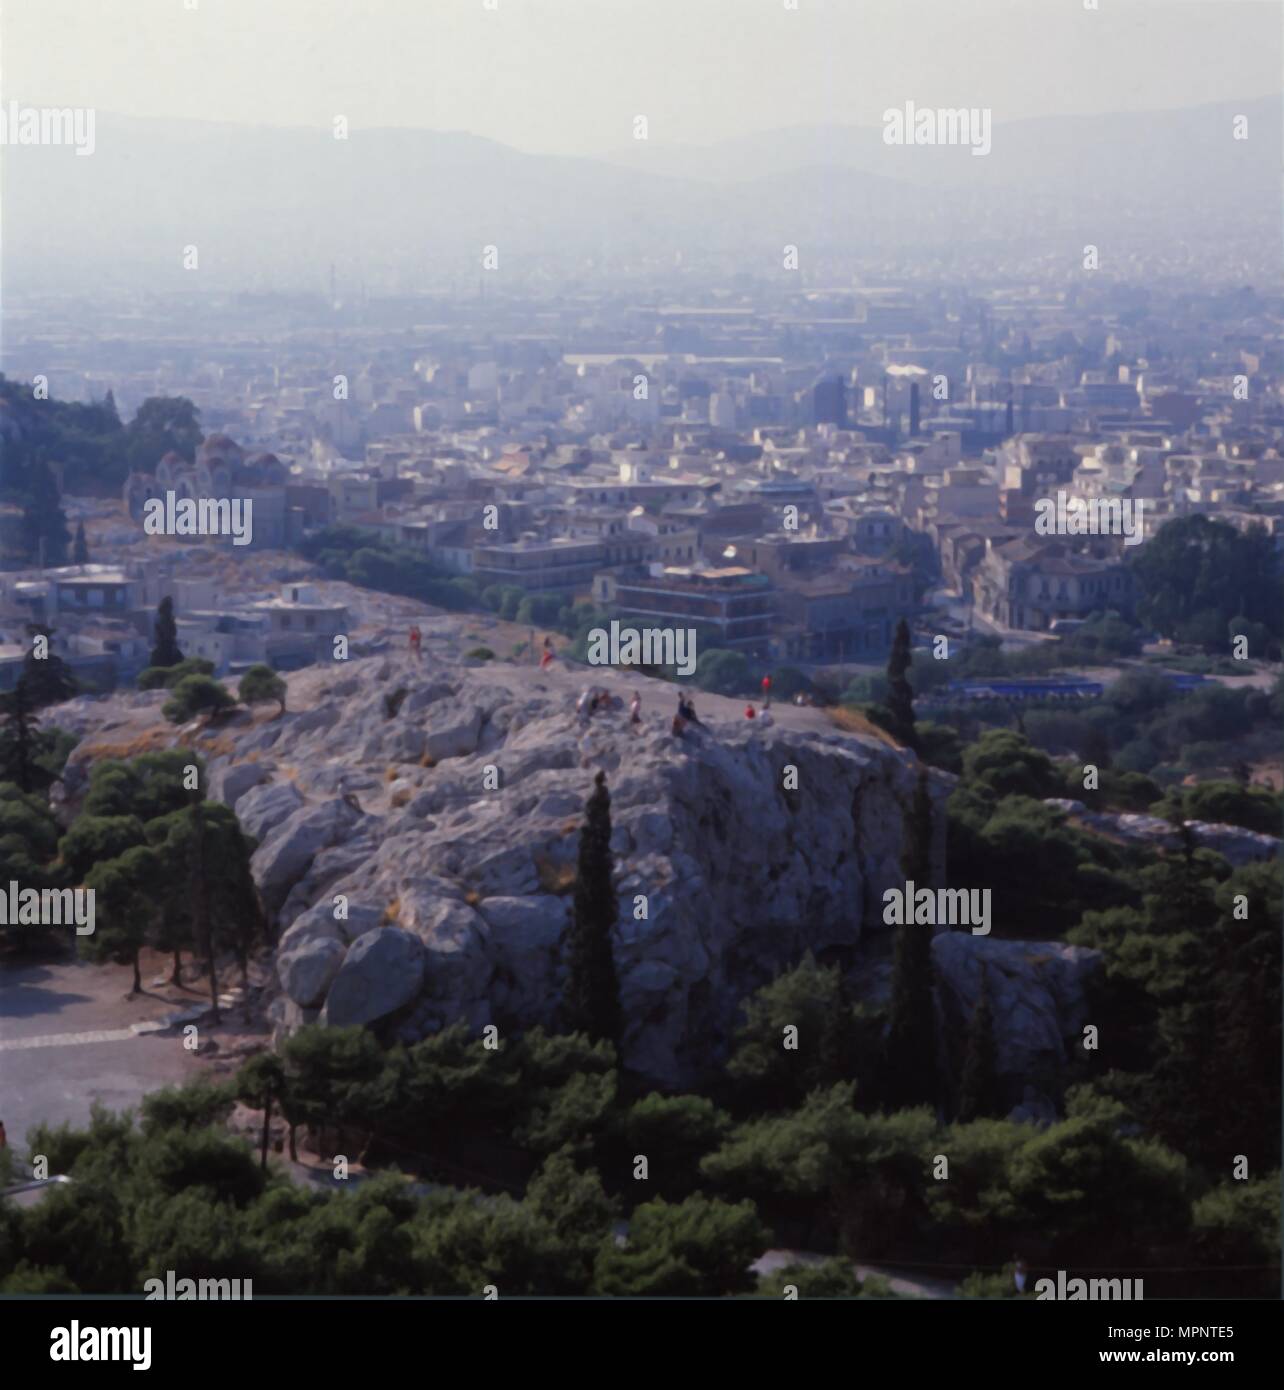 Areopagus Hill seen from the Acropolis, Athens, c20th century. Artist: CM Dixon. Stock Photo